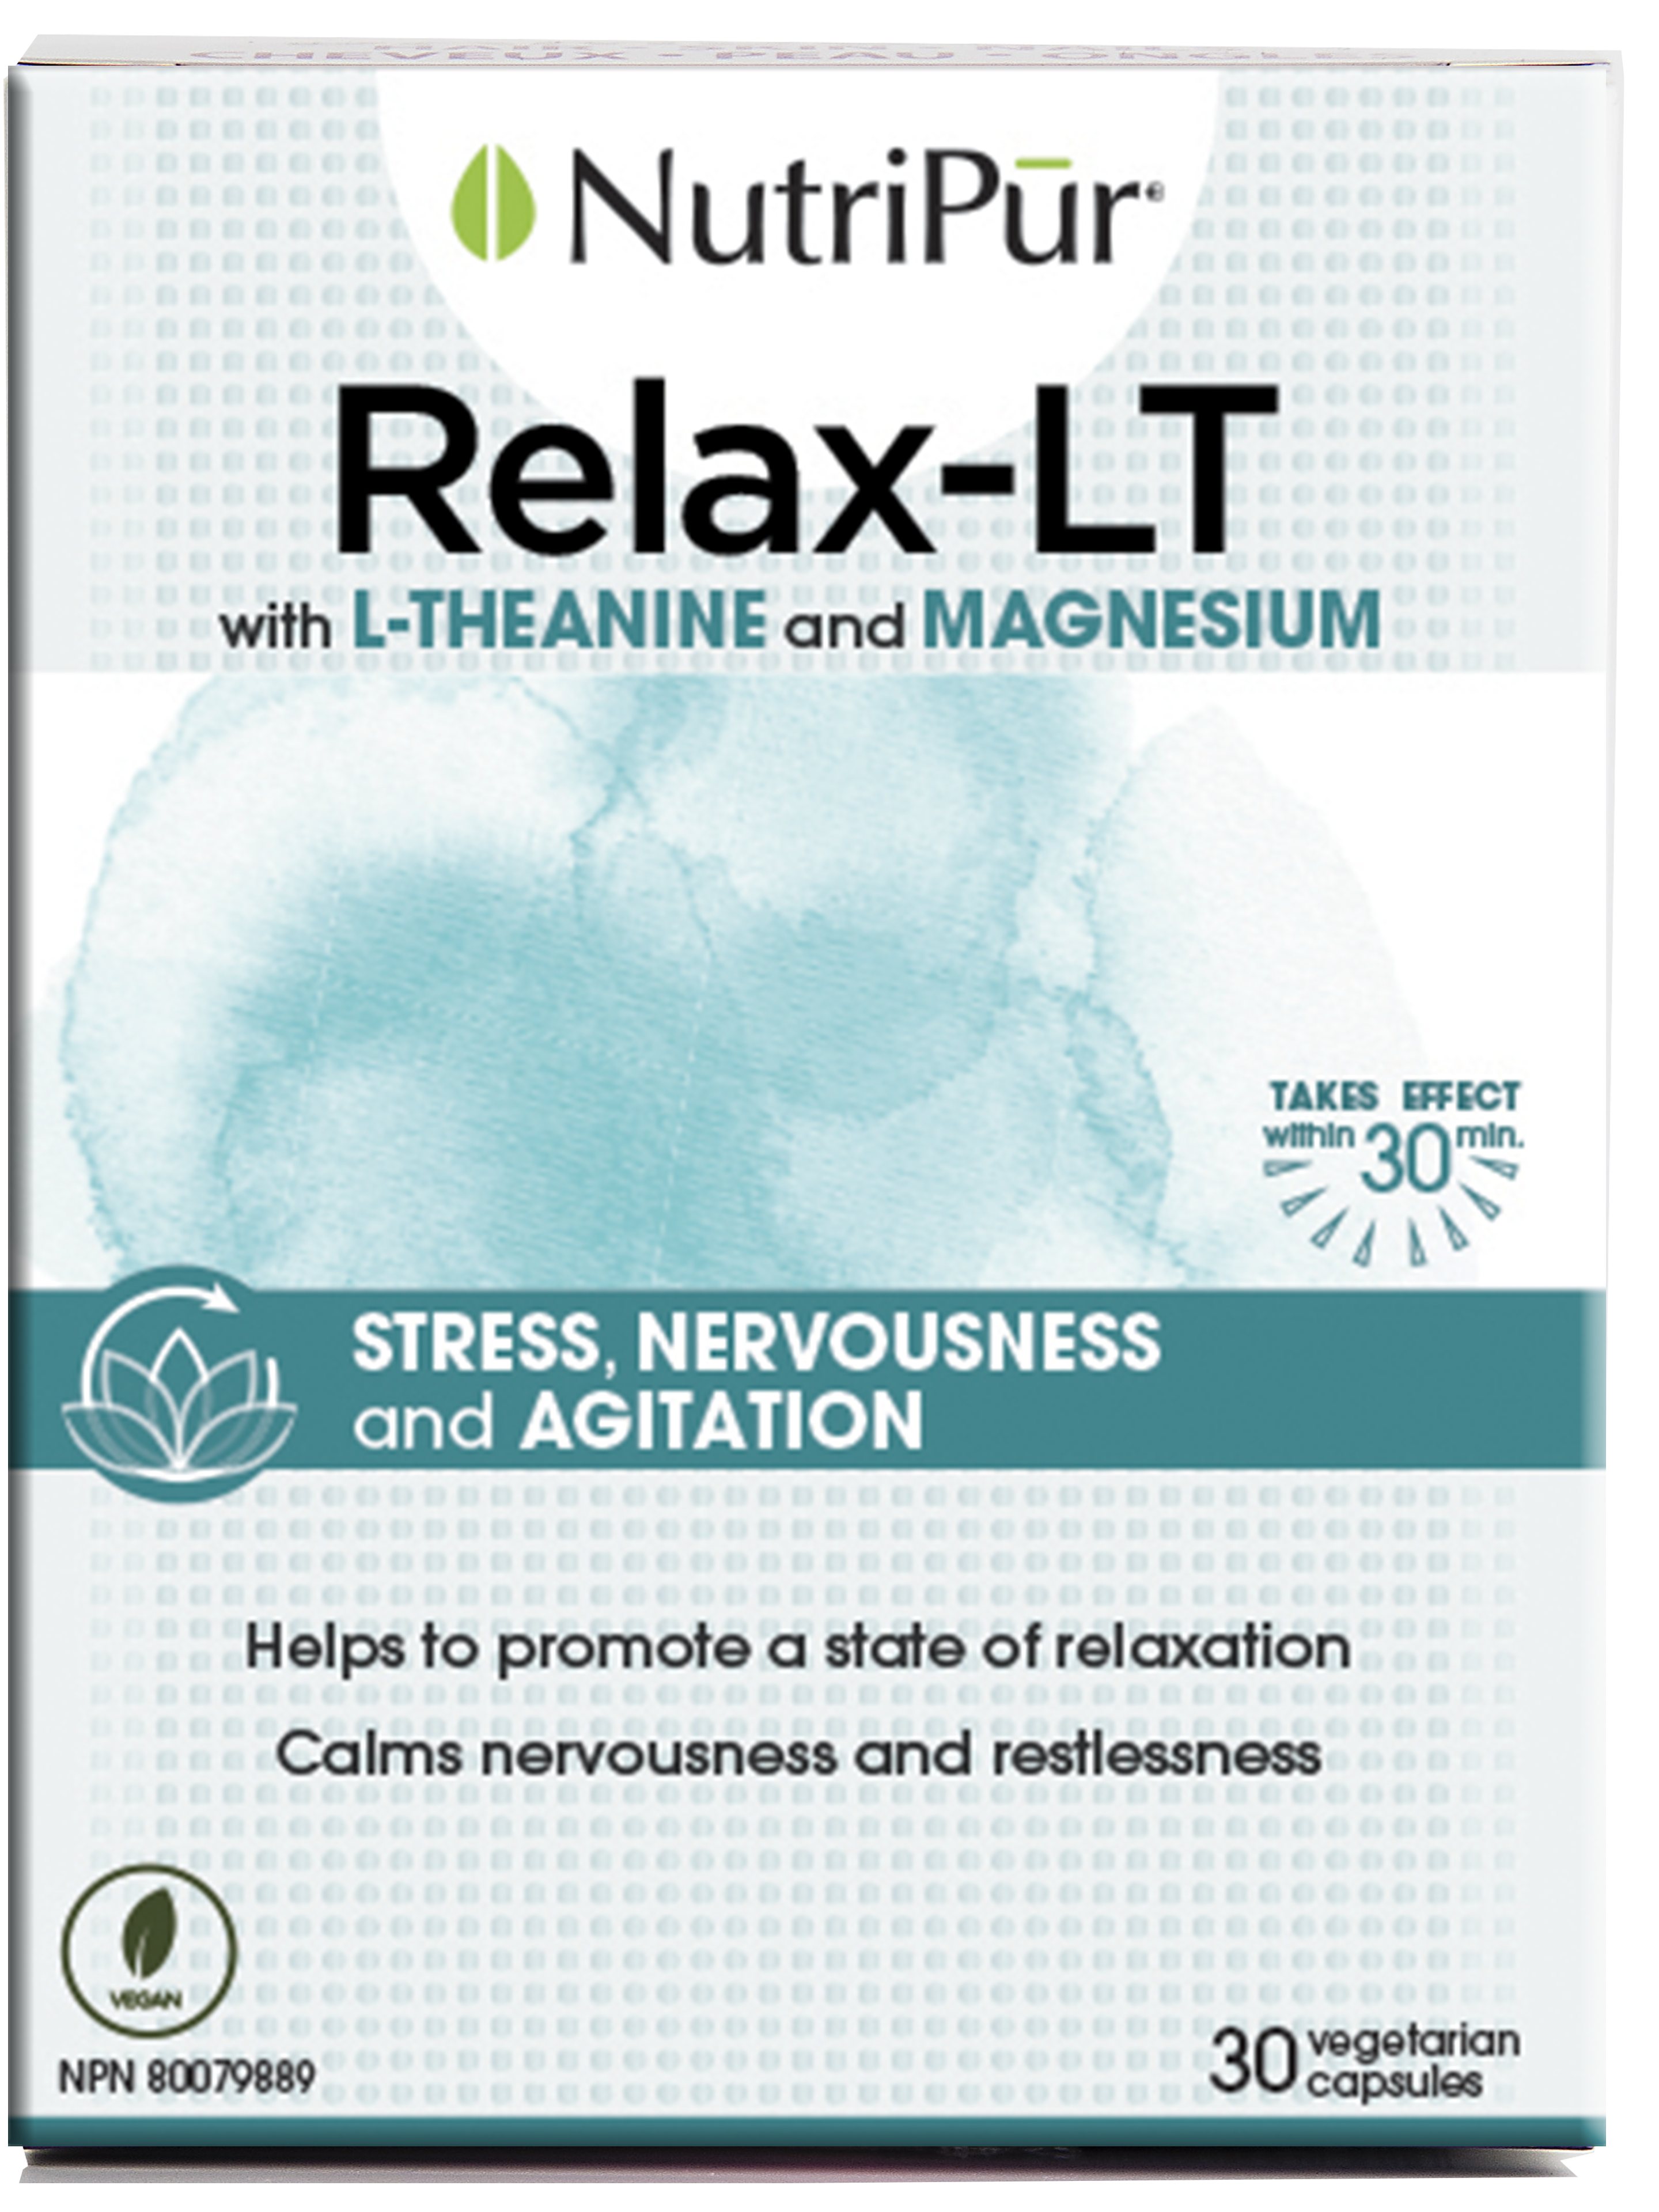 Relax-LT - Nutripur - with L-theanine and Magnesium - stress, nervousness and agitation - helps promote relaxation  and calms nervousness